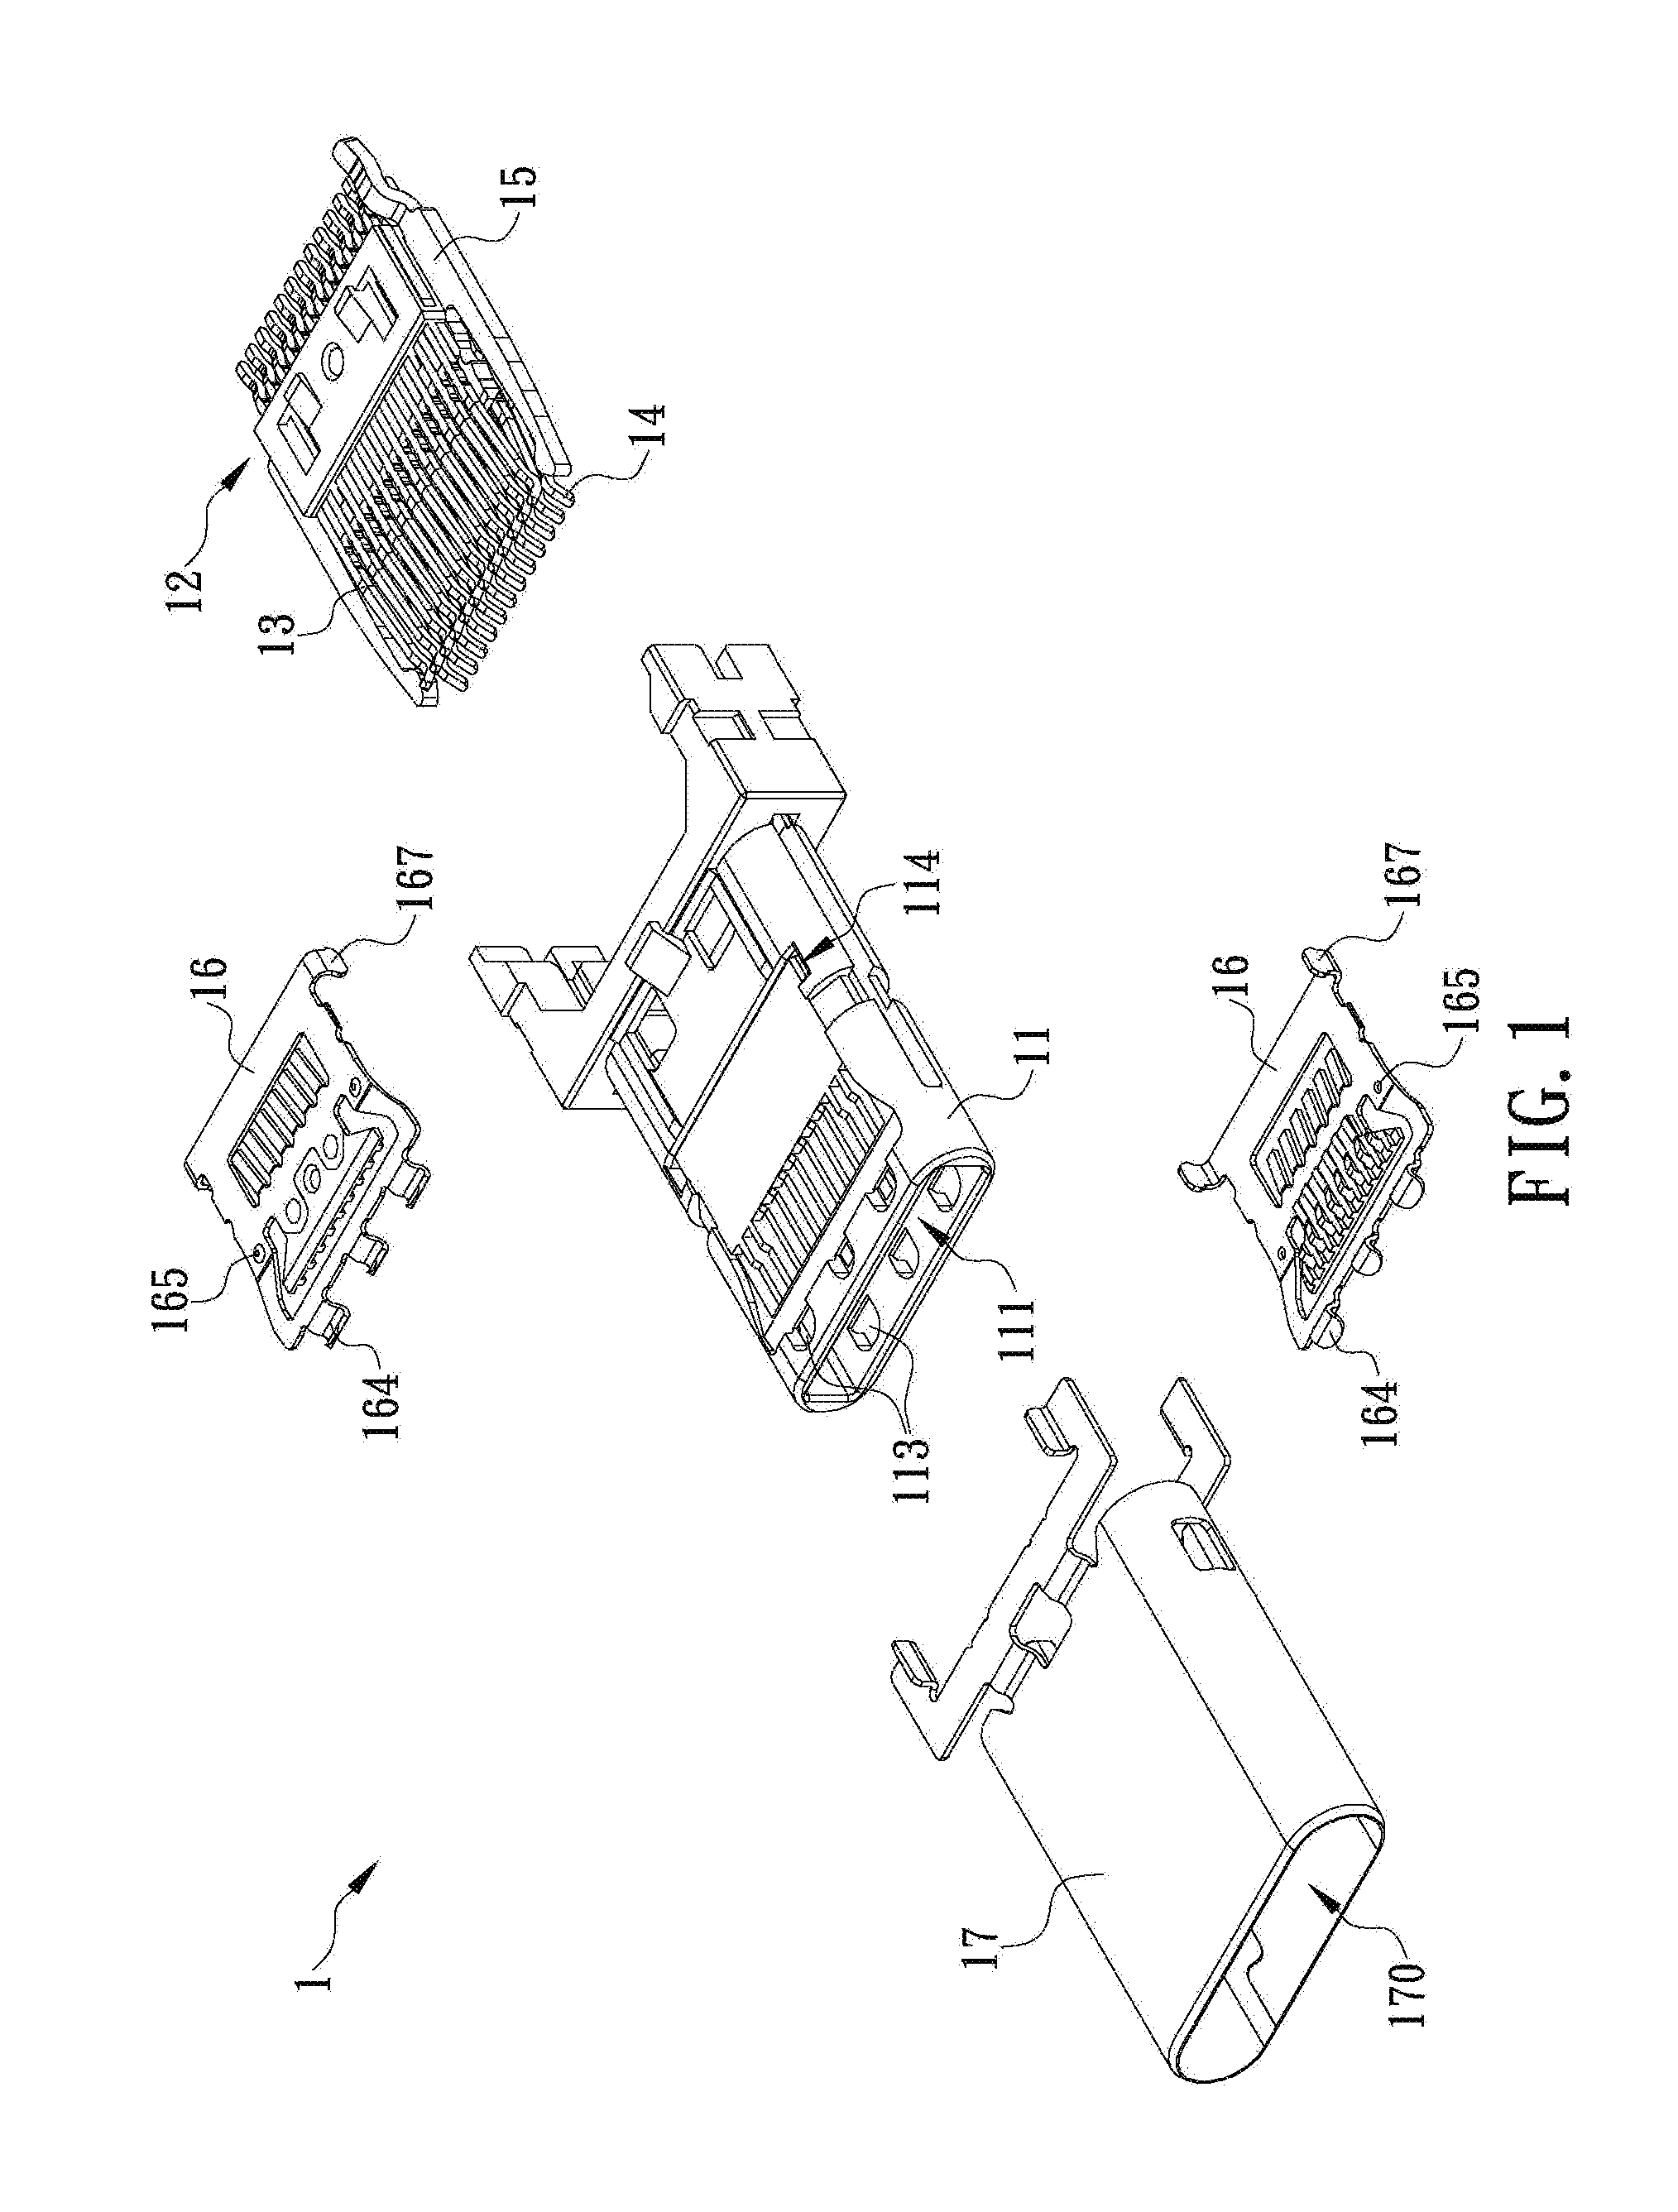 Signal connector having grounding member for pressing and preventing from short-circuit